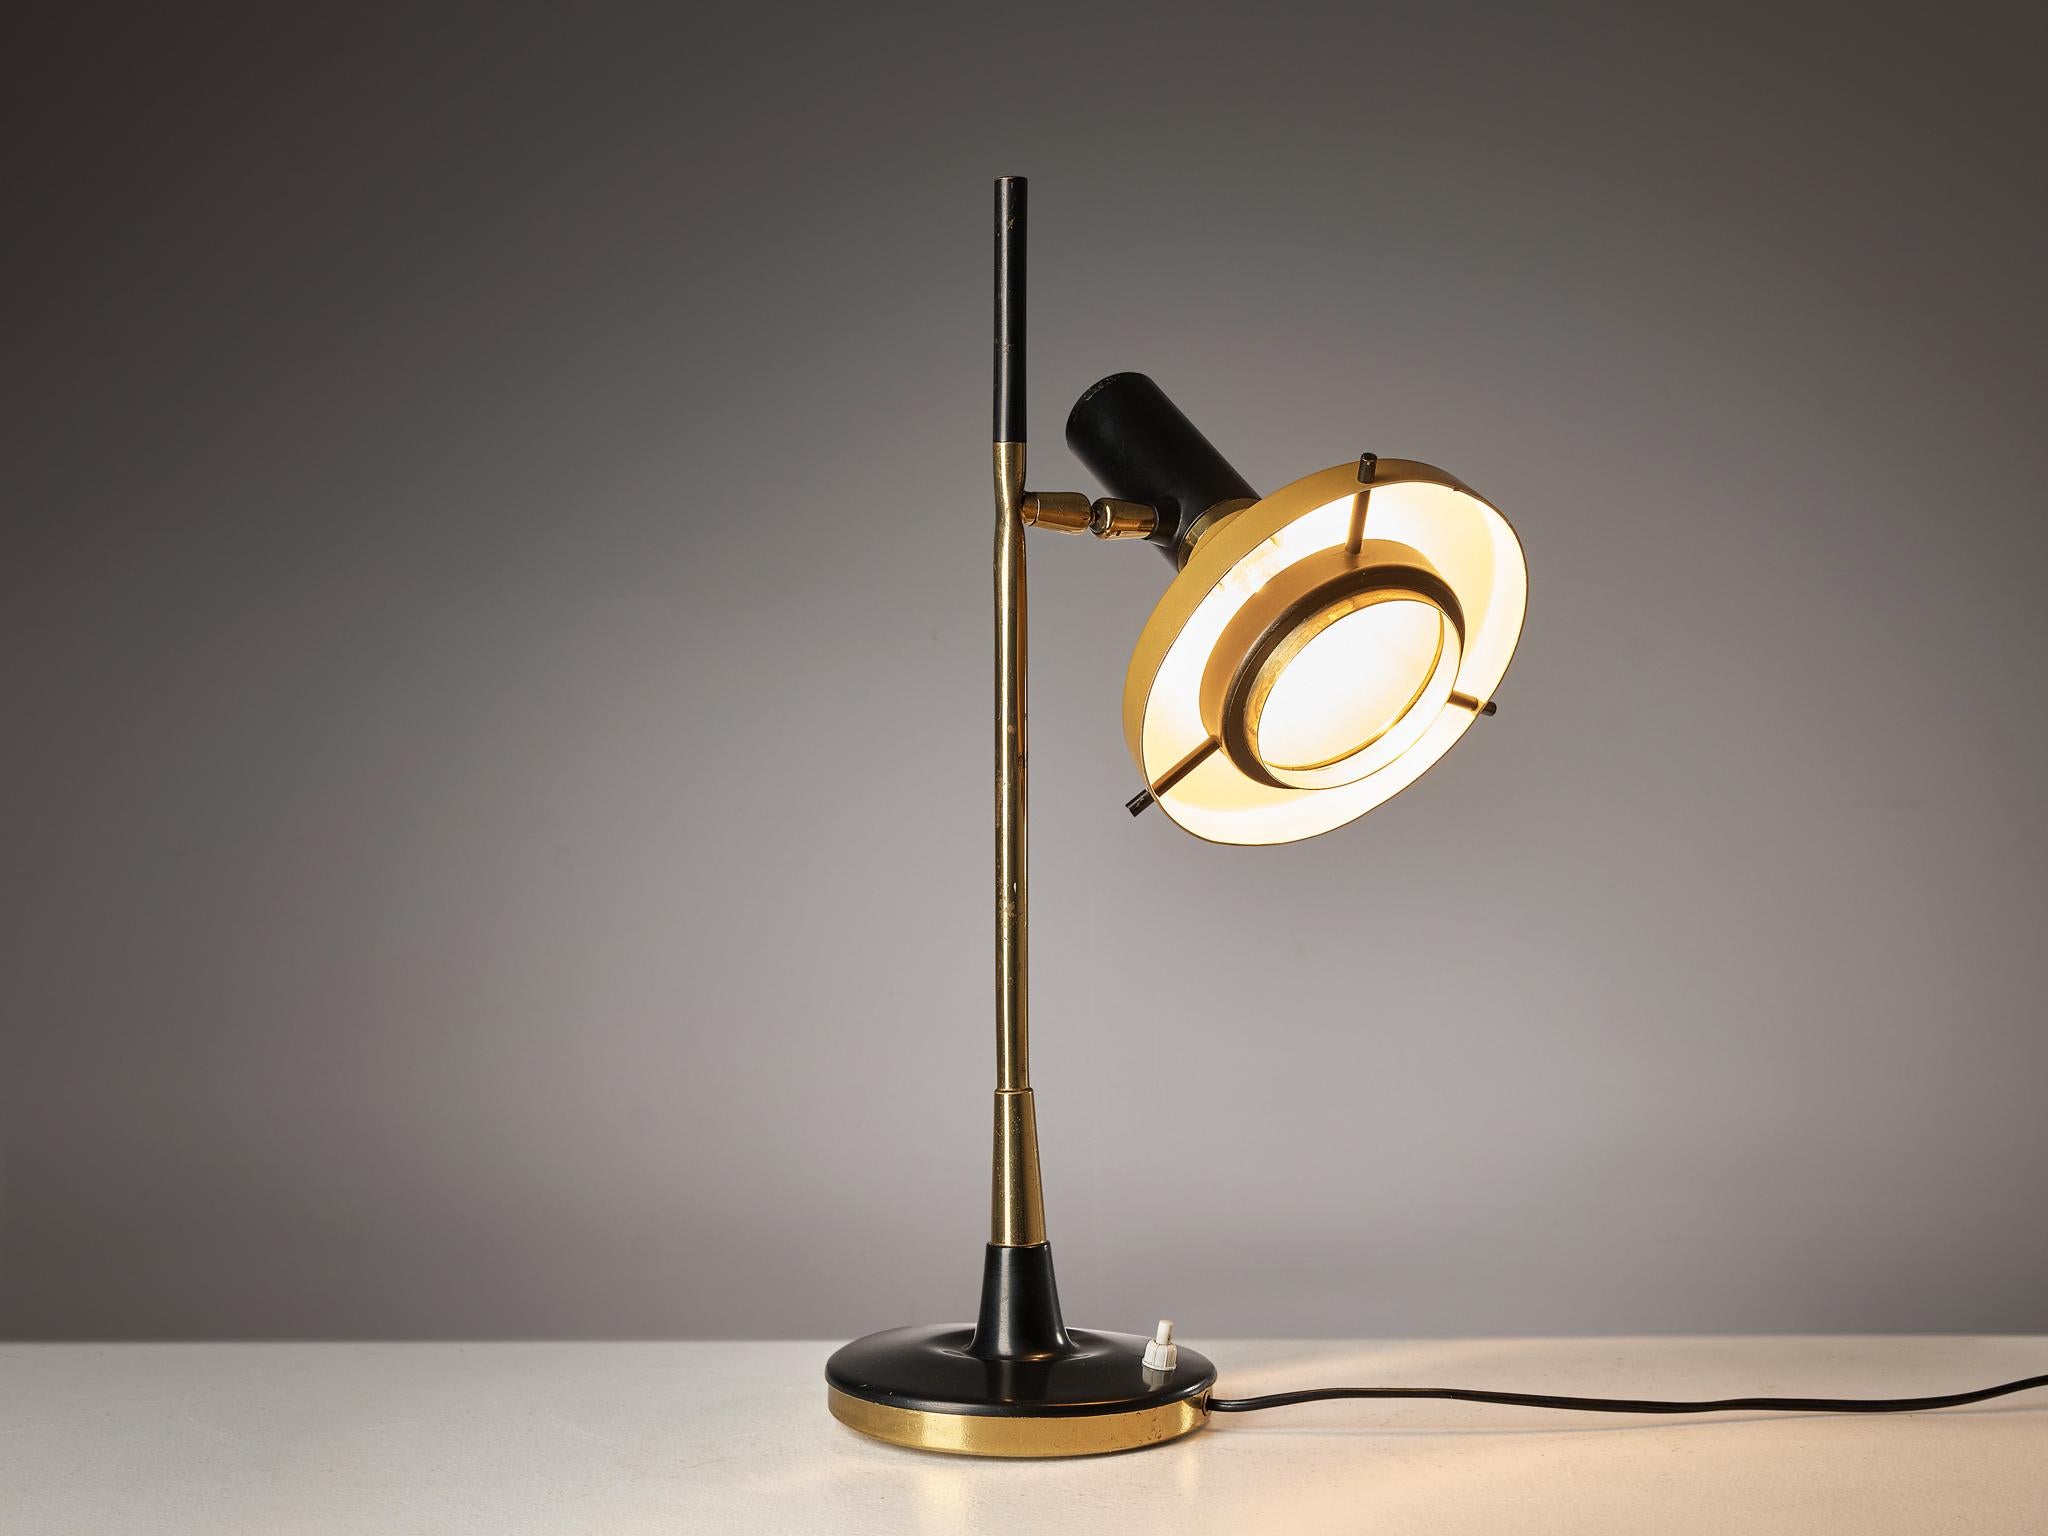 Oscar Torlasco, table lamp '553', metal, brass, Italy, 1950s.

Refined small desk light by Italian designer Oscar Torlasco for Lumi. The light consists of a round base in black coated metal with a bottom in brass. The stem is also executed in